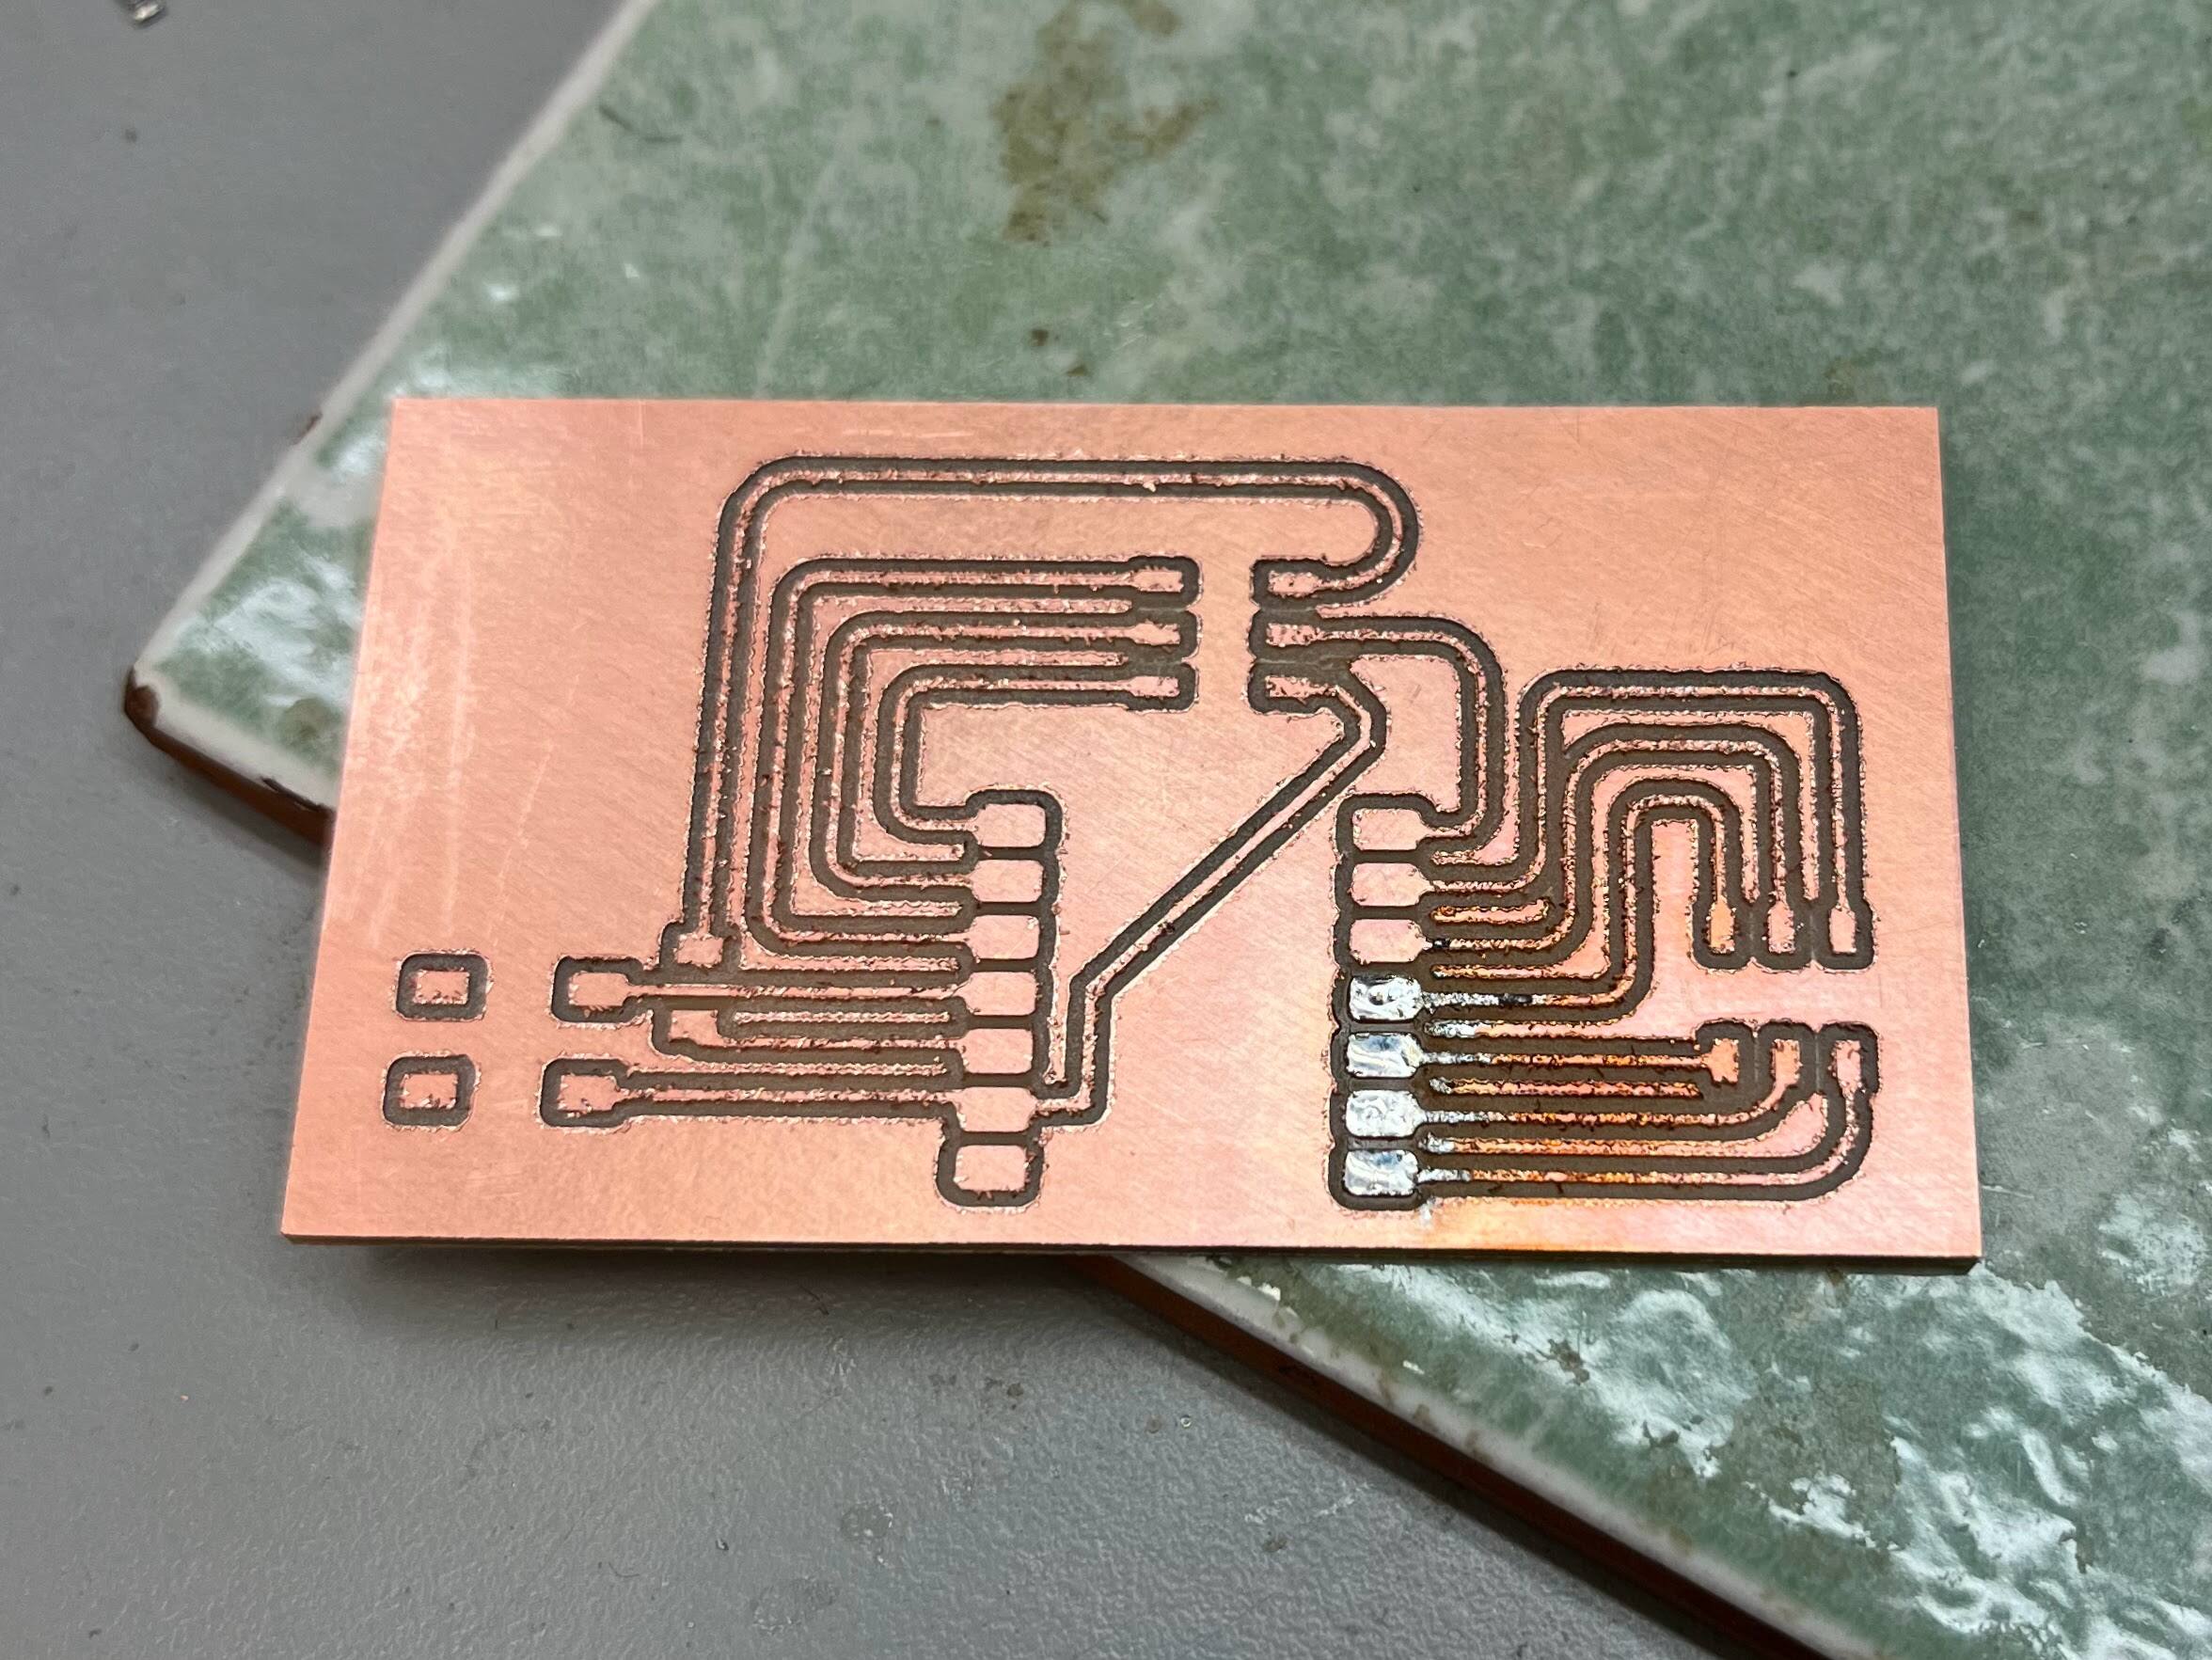 PCB after desoldering the microcontroller